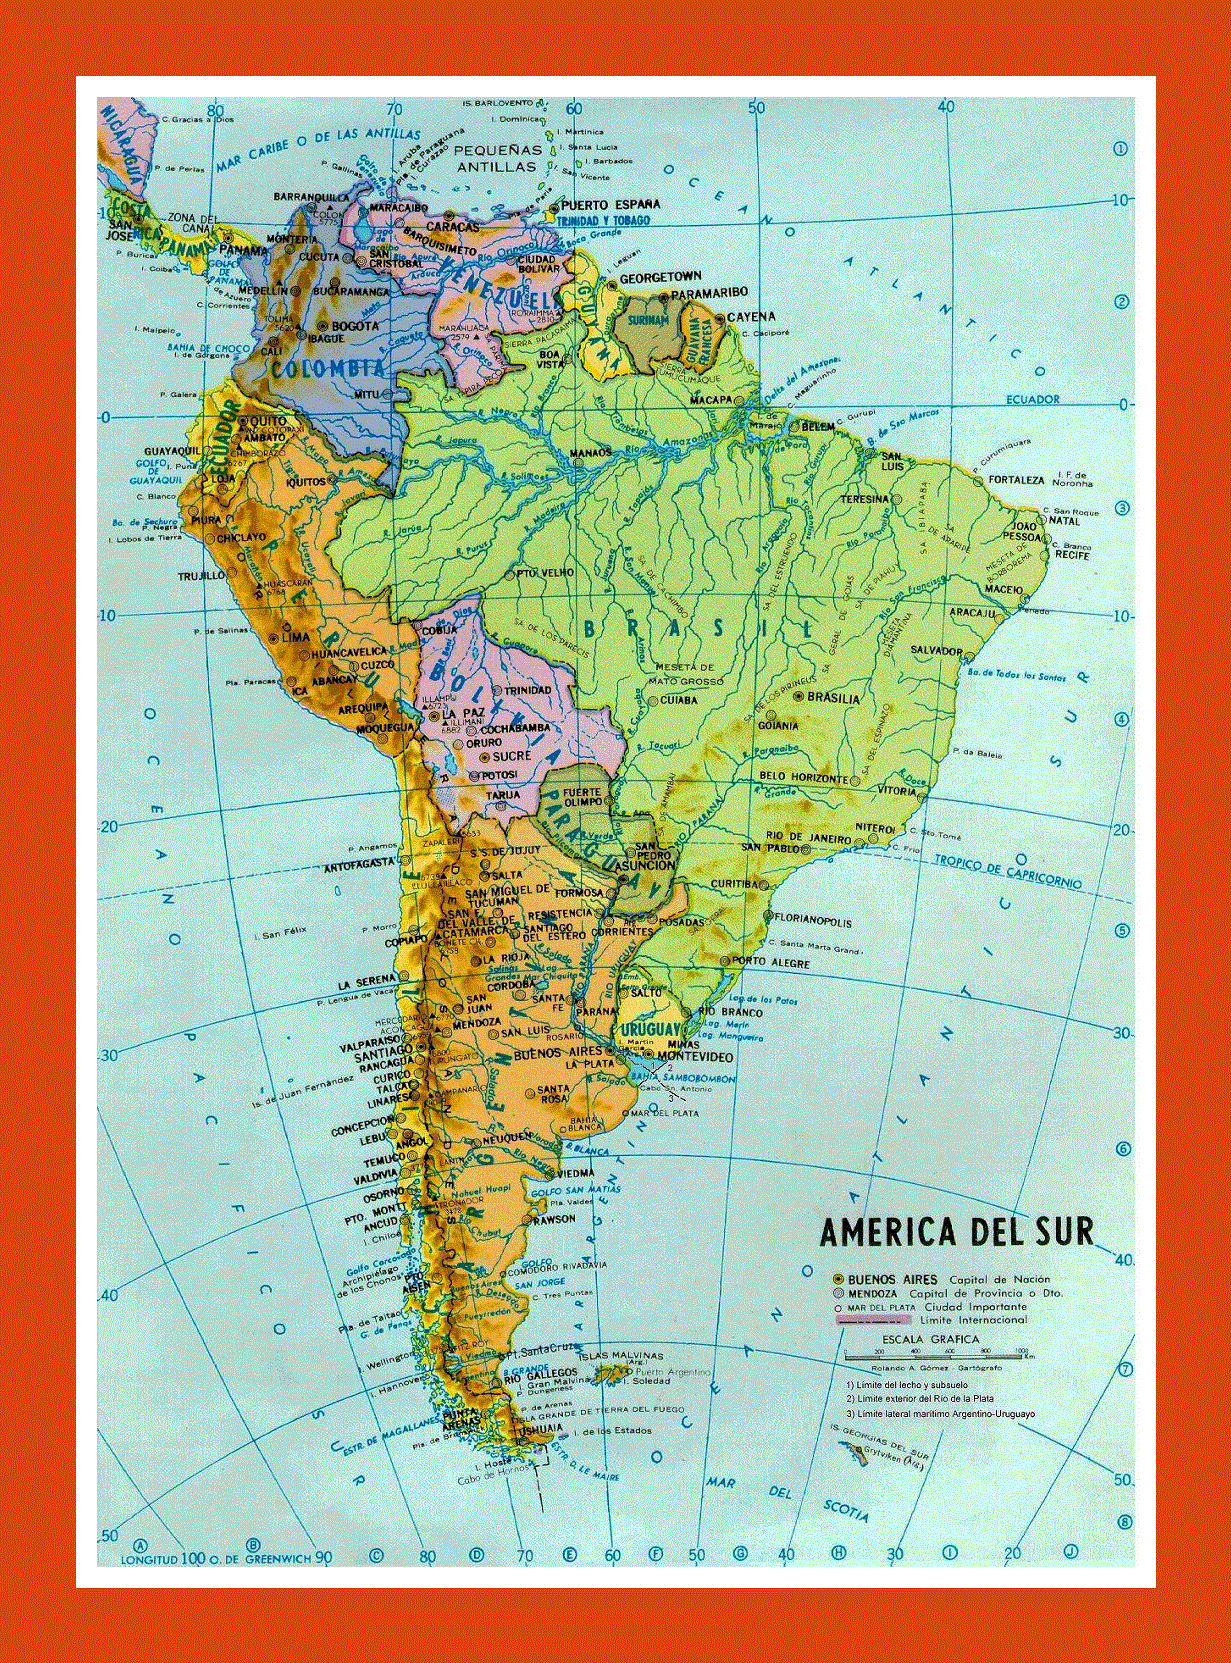 Political and hydrographic map of South America